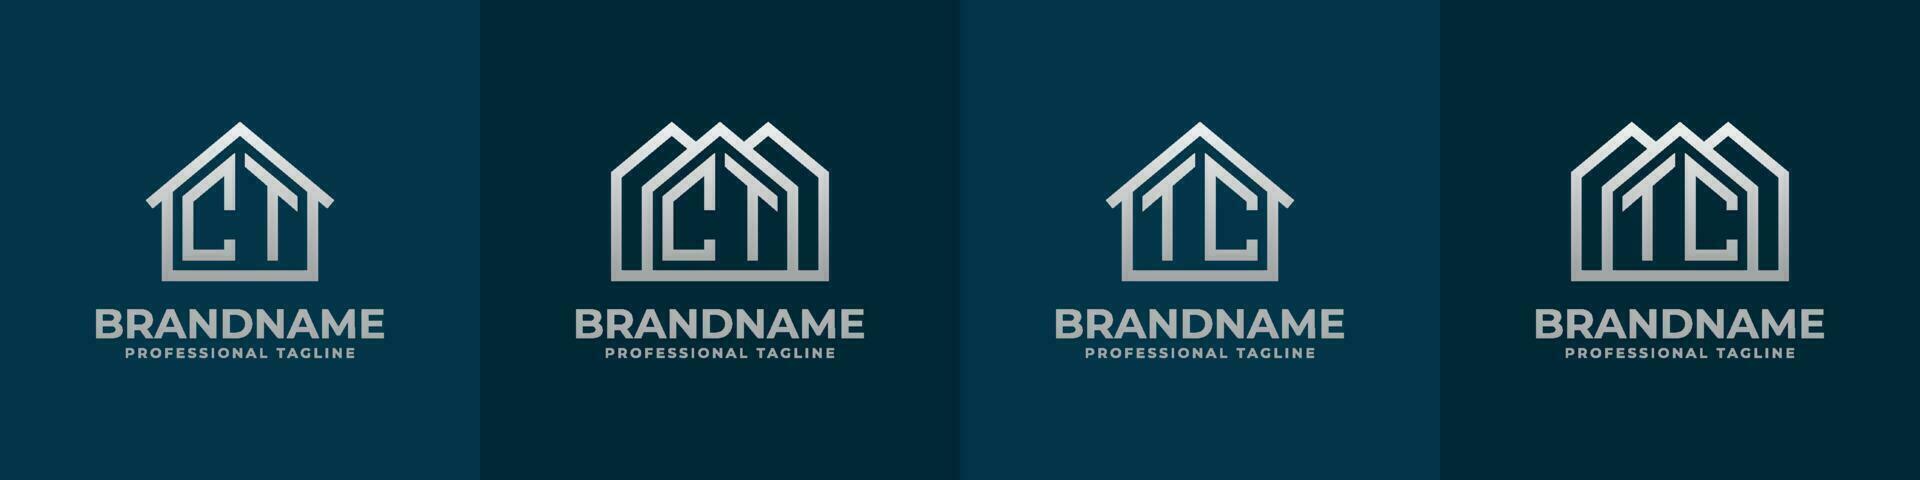 Letter CT and TC Home Logo Set. Suitable for any business related to house, real estate, construction, interior with CT or TC initials. vector